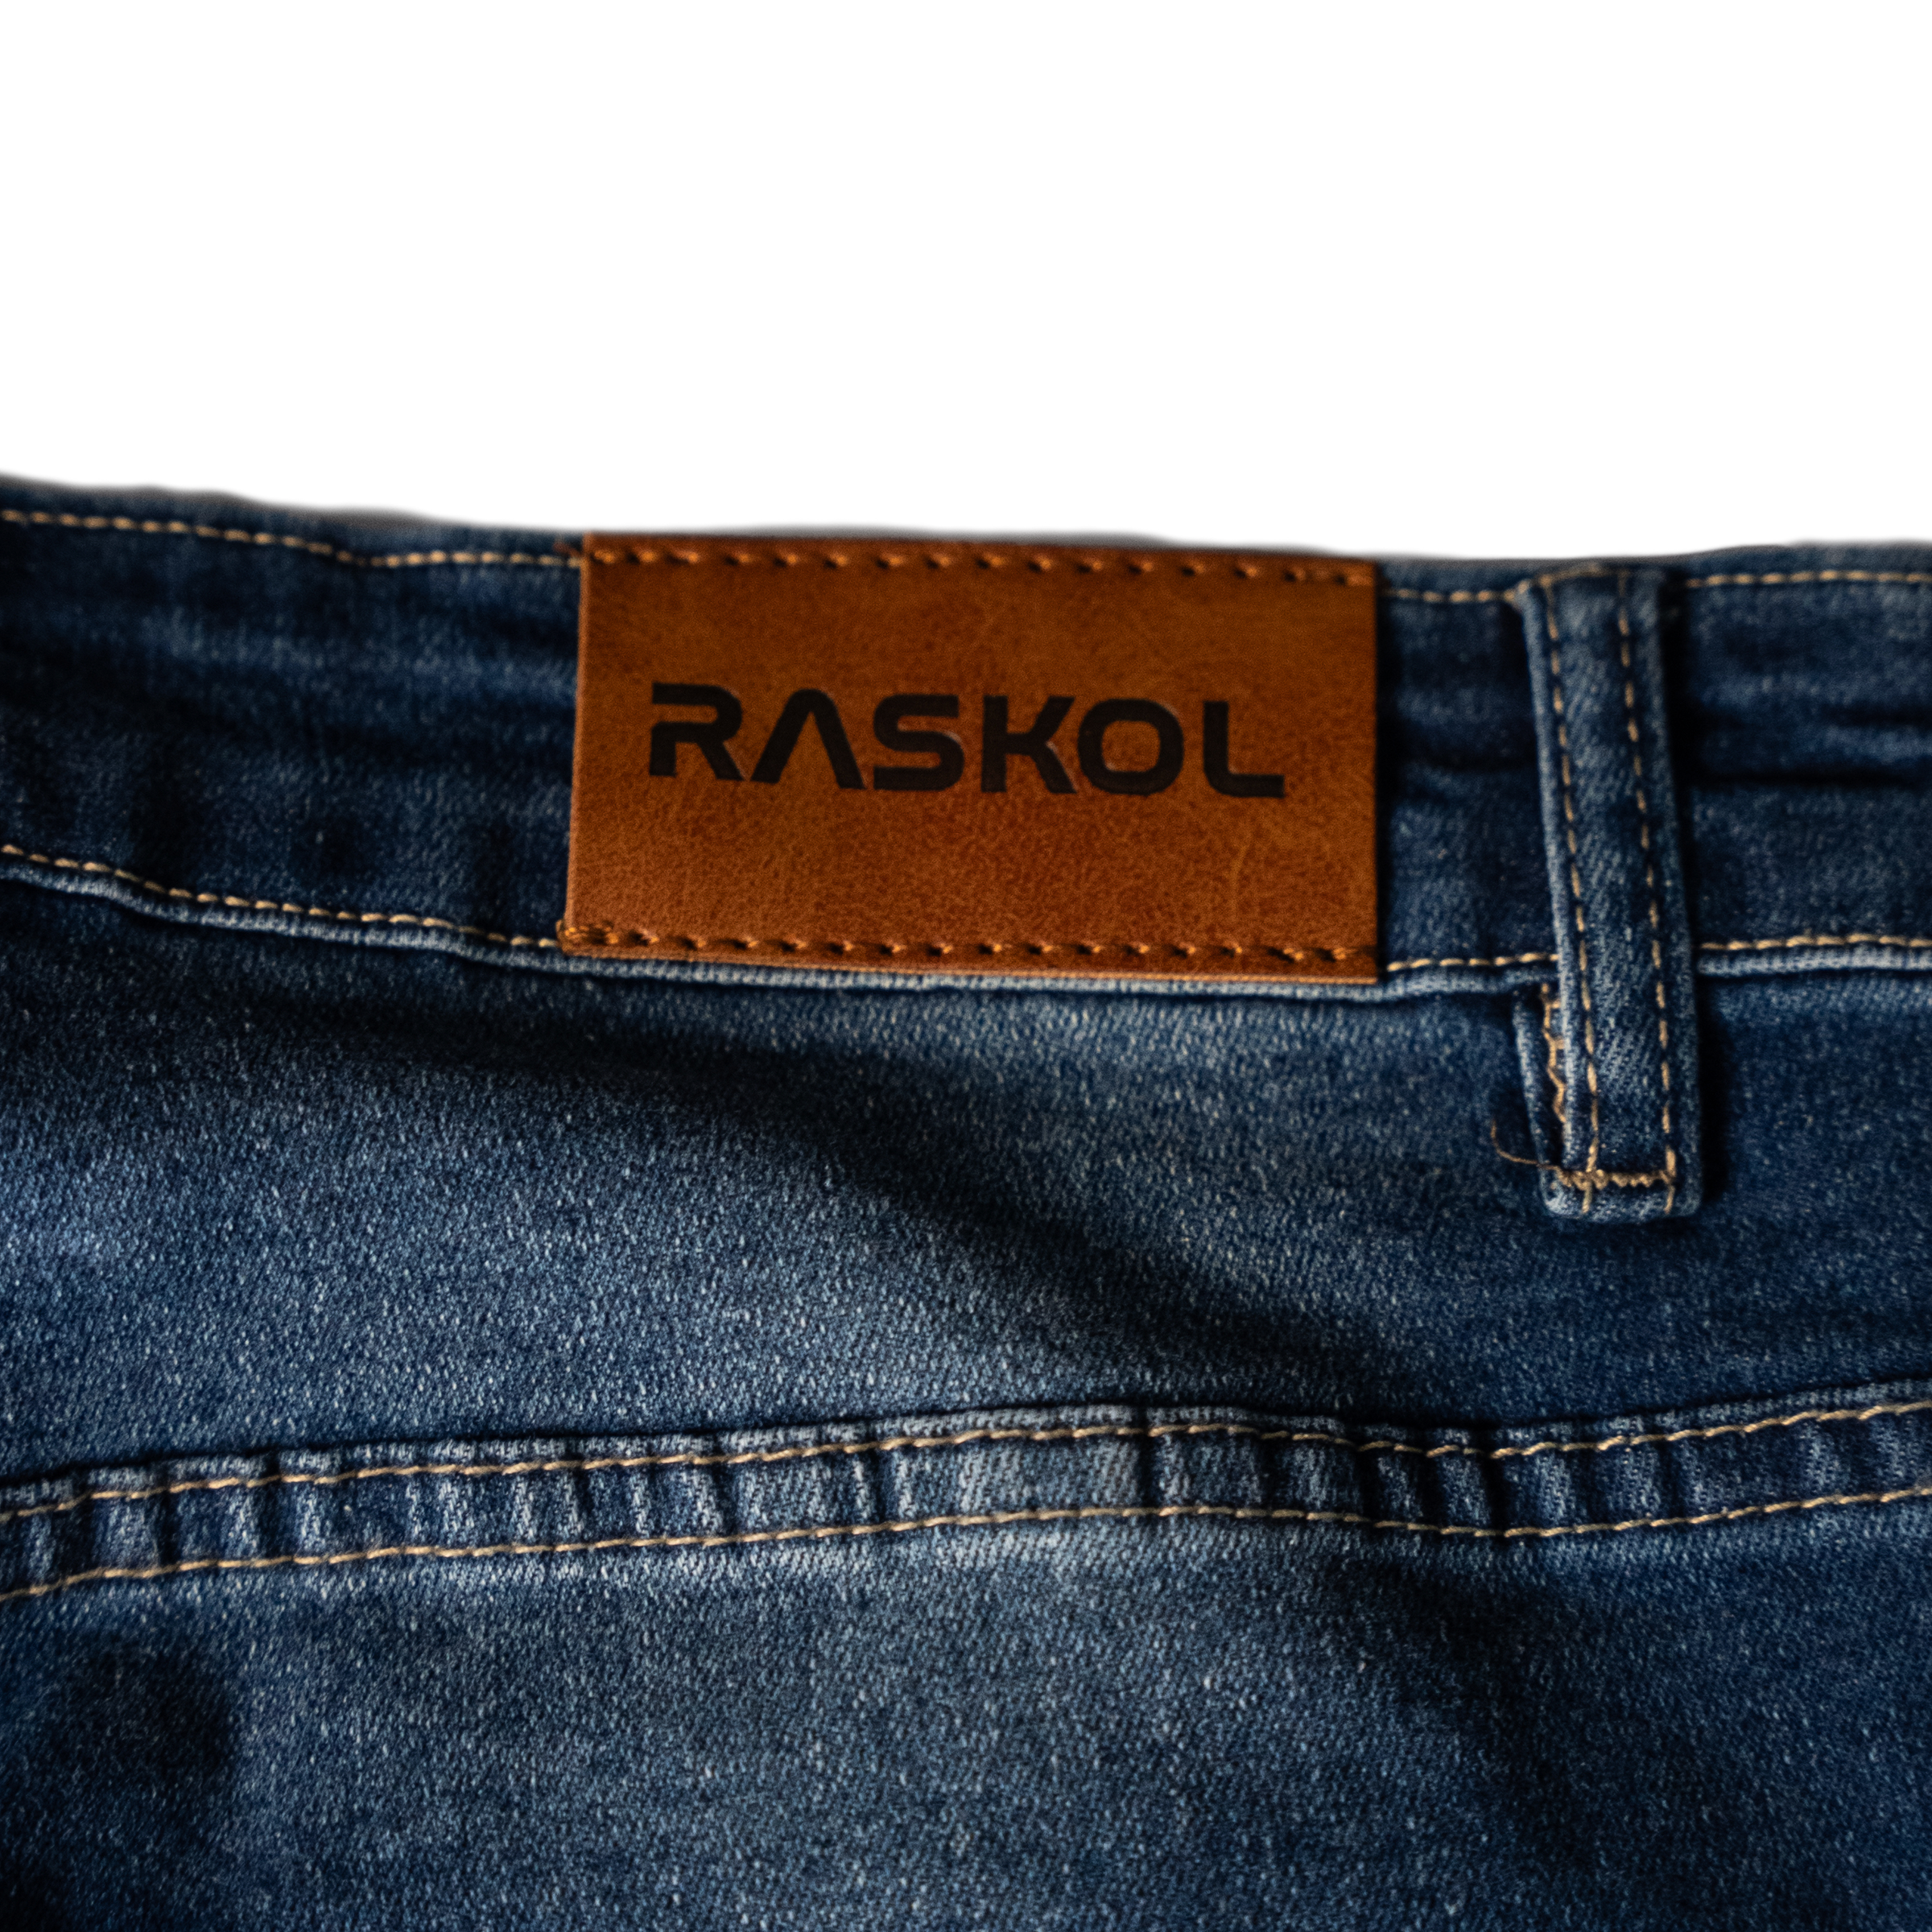 Mason SEMI-RELAXED Jeans for Tall Men in Blue Steel